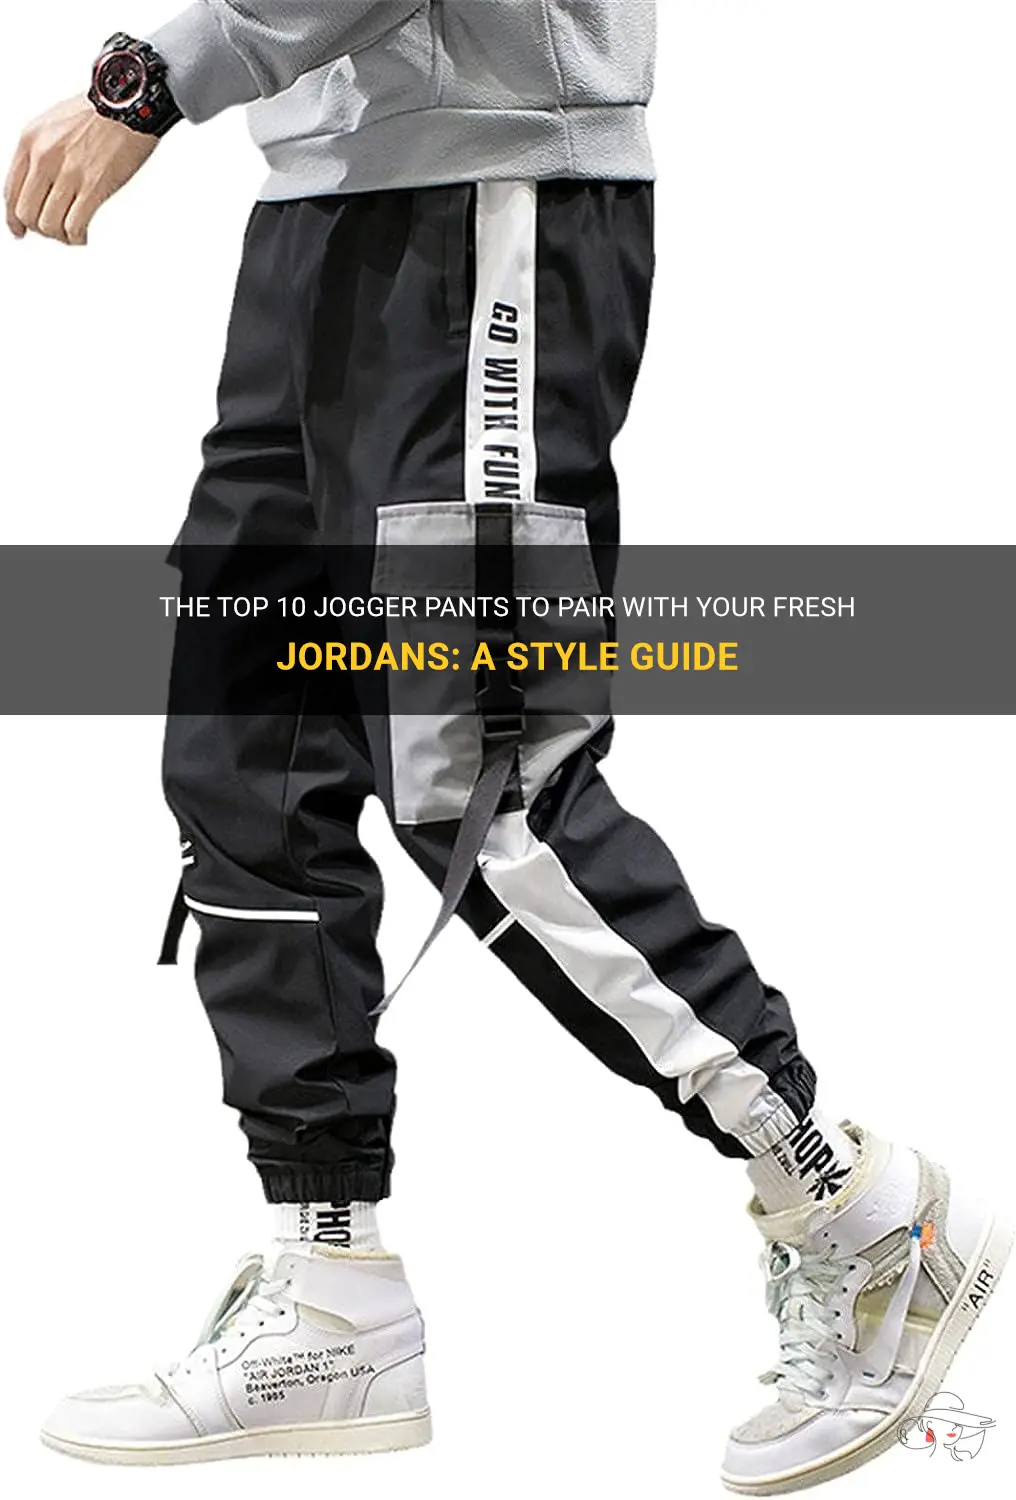 The Top 10 Jogger Pants To Pair With Your Fresh Jordans: A Style Guide ...